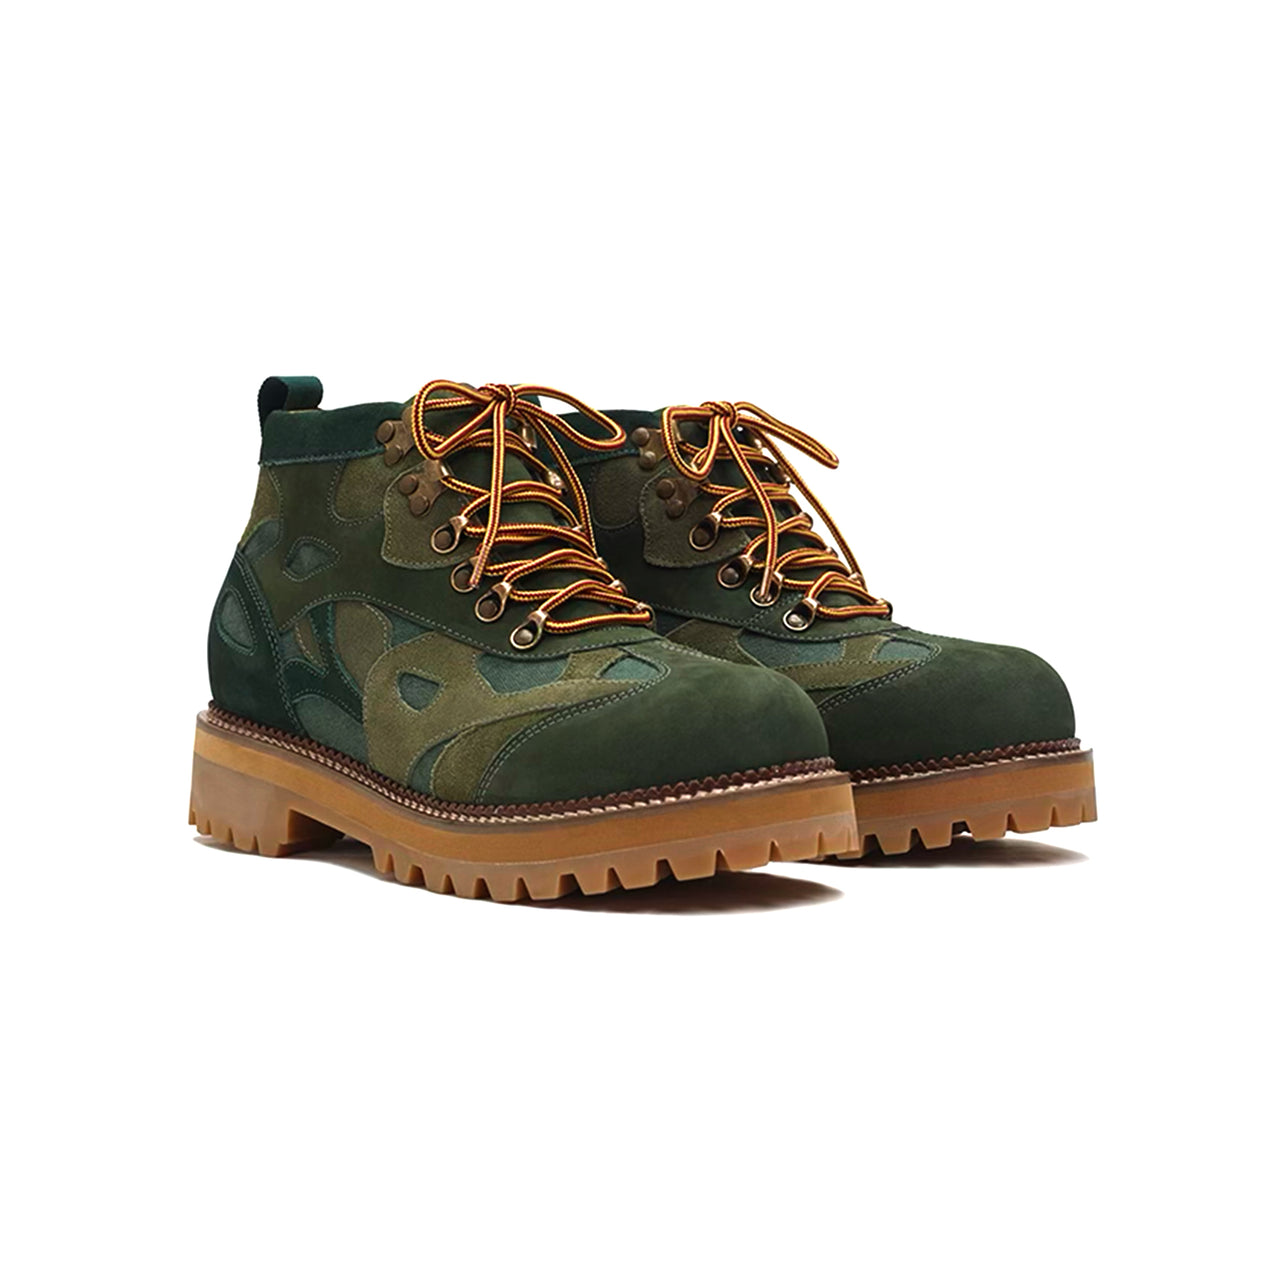 Boots With Swirls [Green]